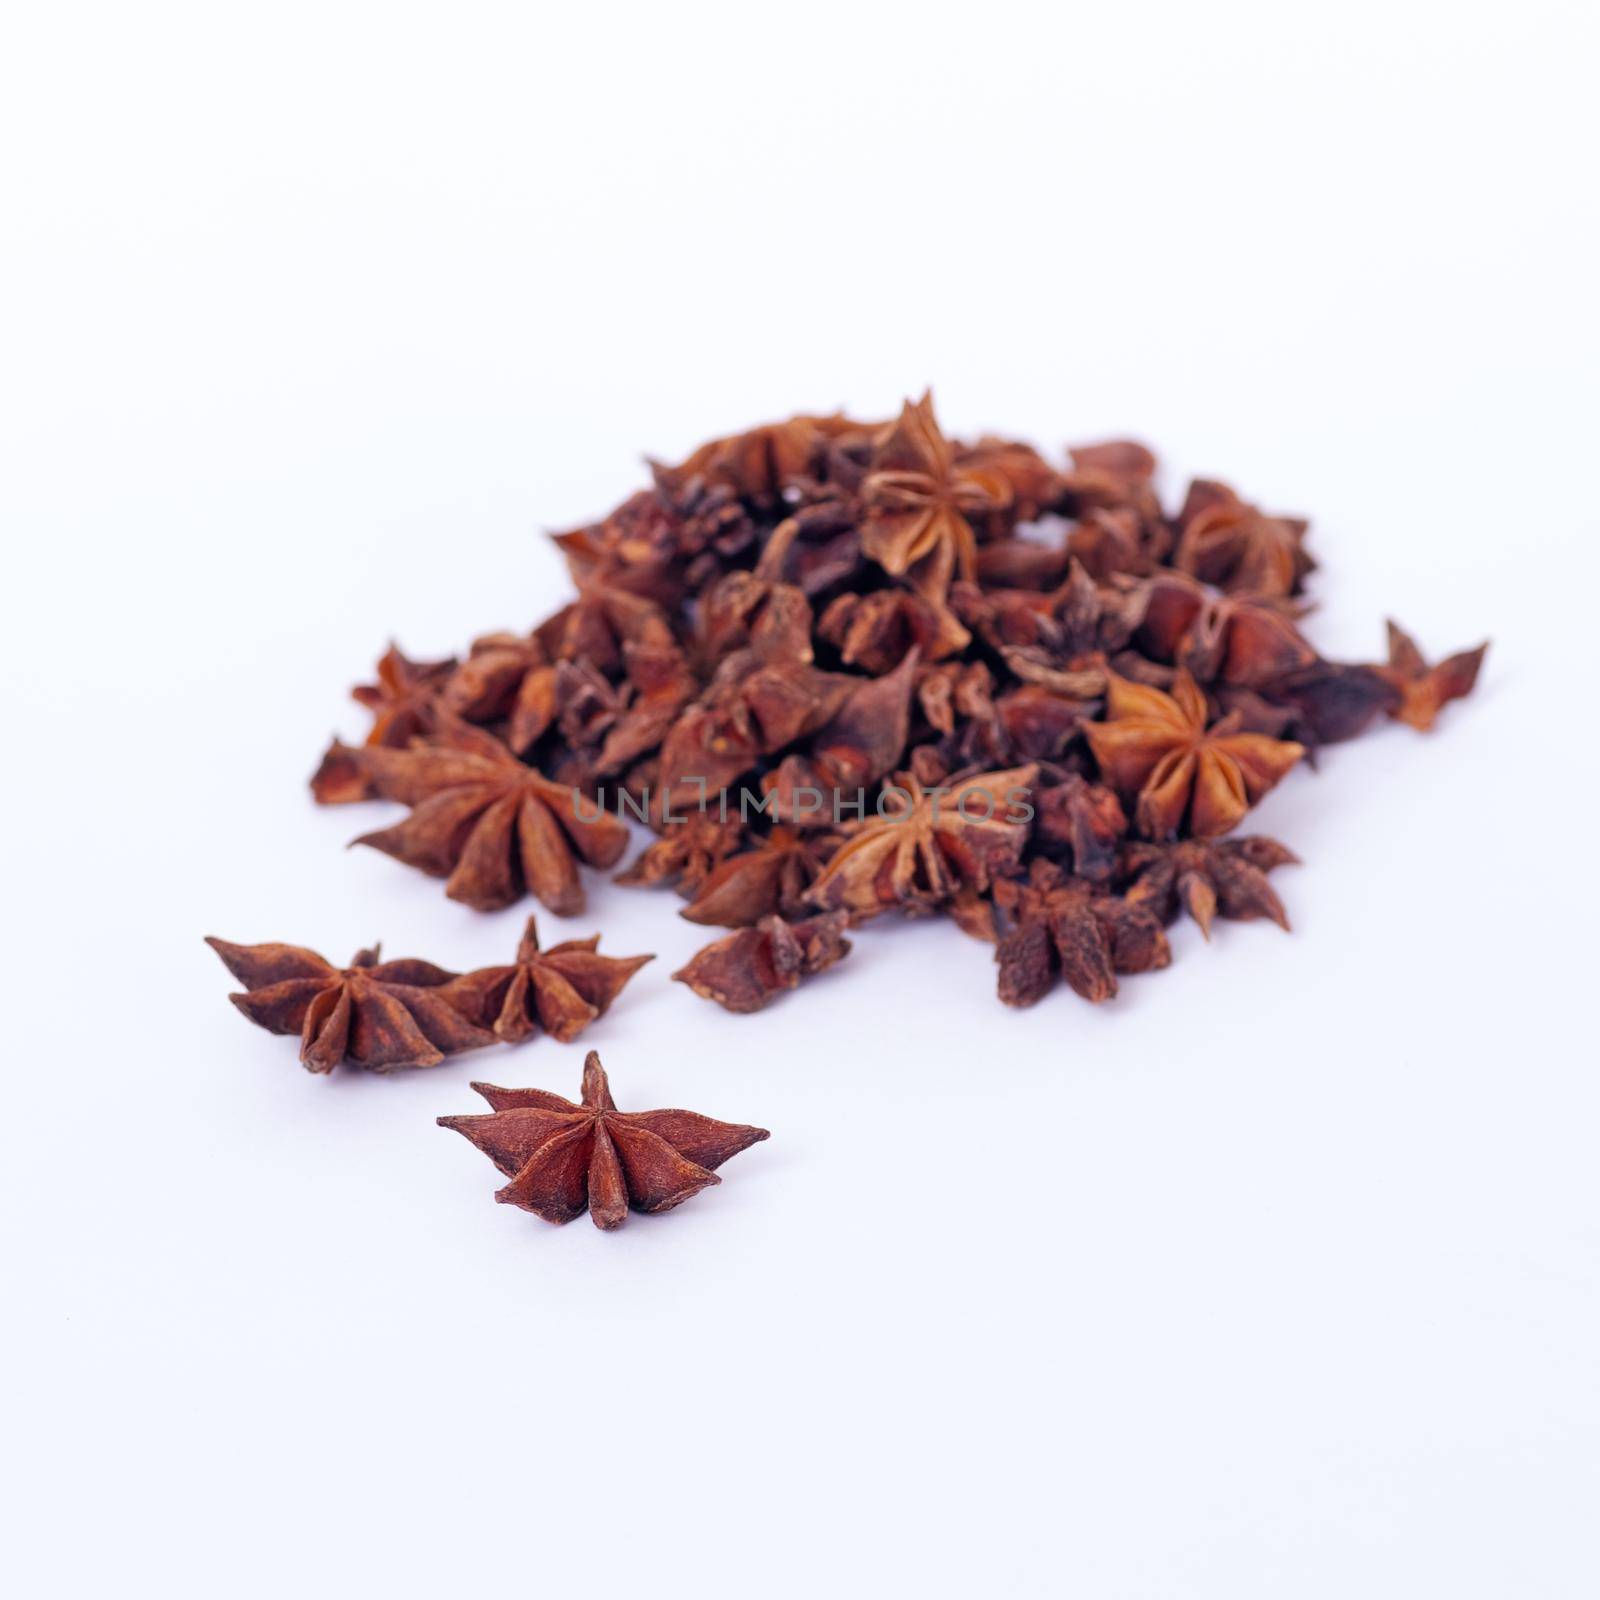 Spicy Chinese Anise by Kzenon